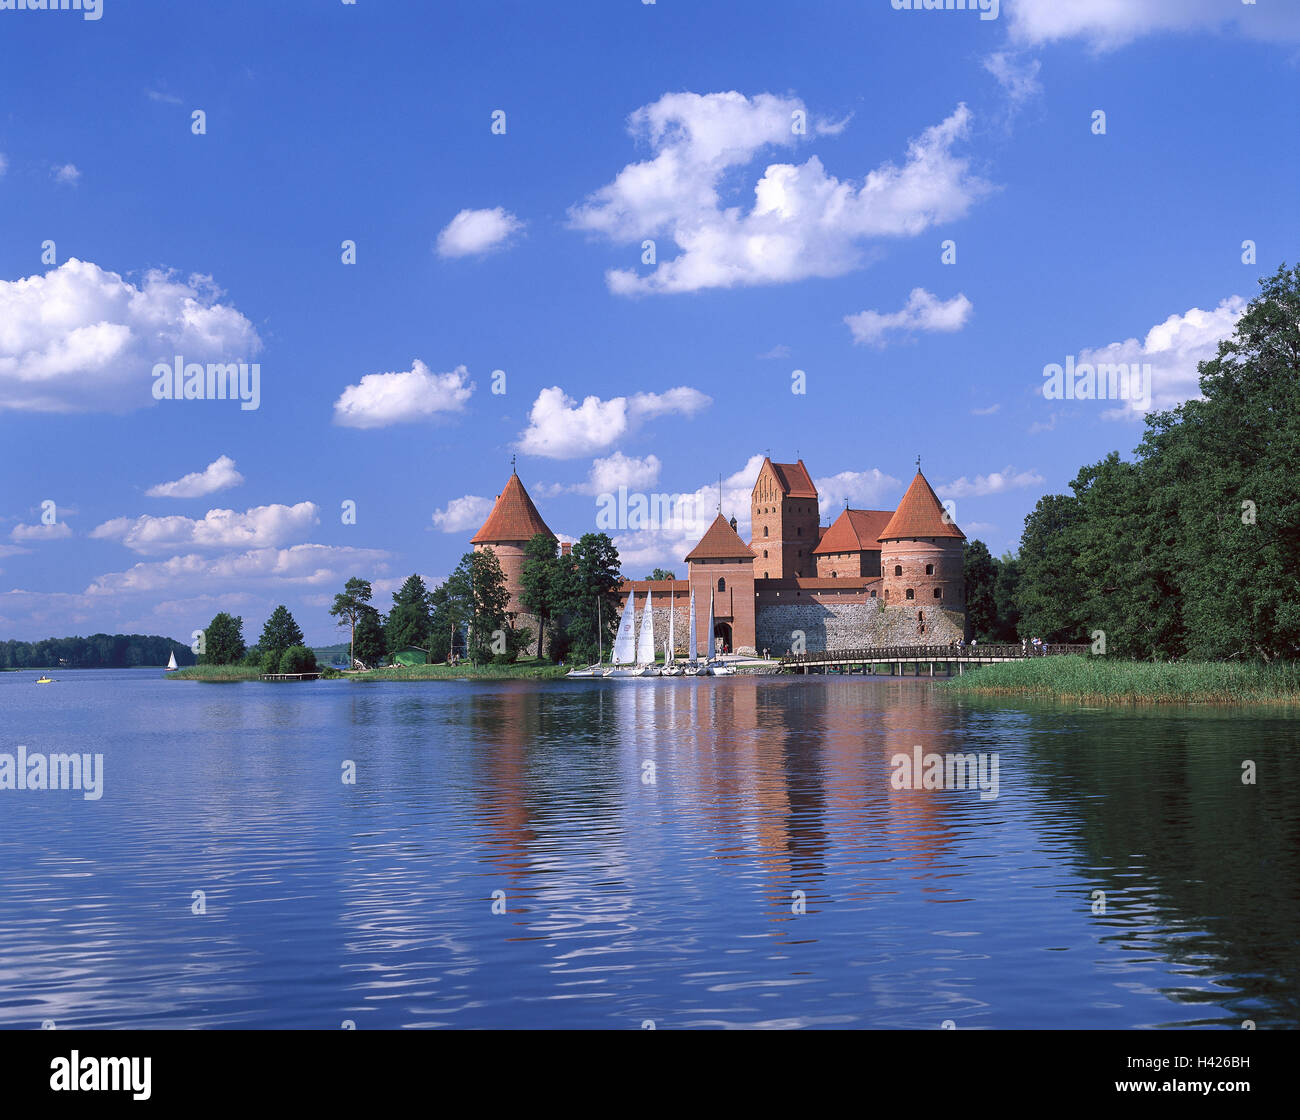 Lithuania, quay Tra, Galve Su, island castle, landing stage, boots, Europe, Nordosteuropa, the Baltic States, Lietuva, Lietuvos Respublika, Galvesee, Galve lake, island, castle, castle grounds, military plant, structure, architecture, place of interest, lake, sailboats, heavens, clouds Stock Photo